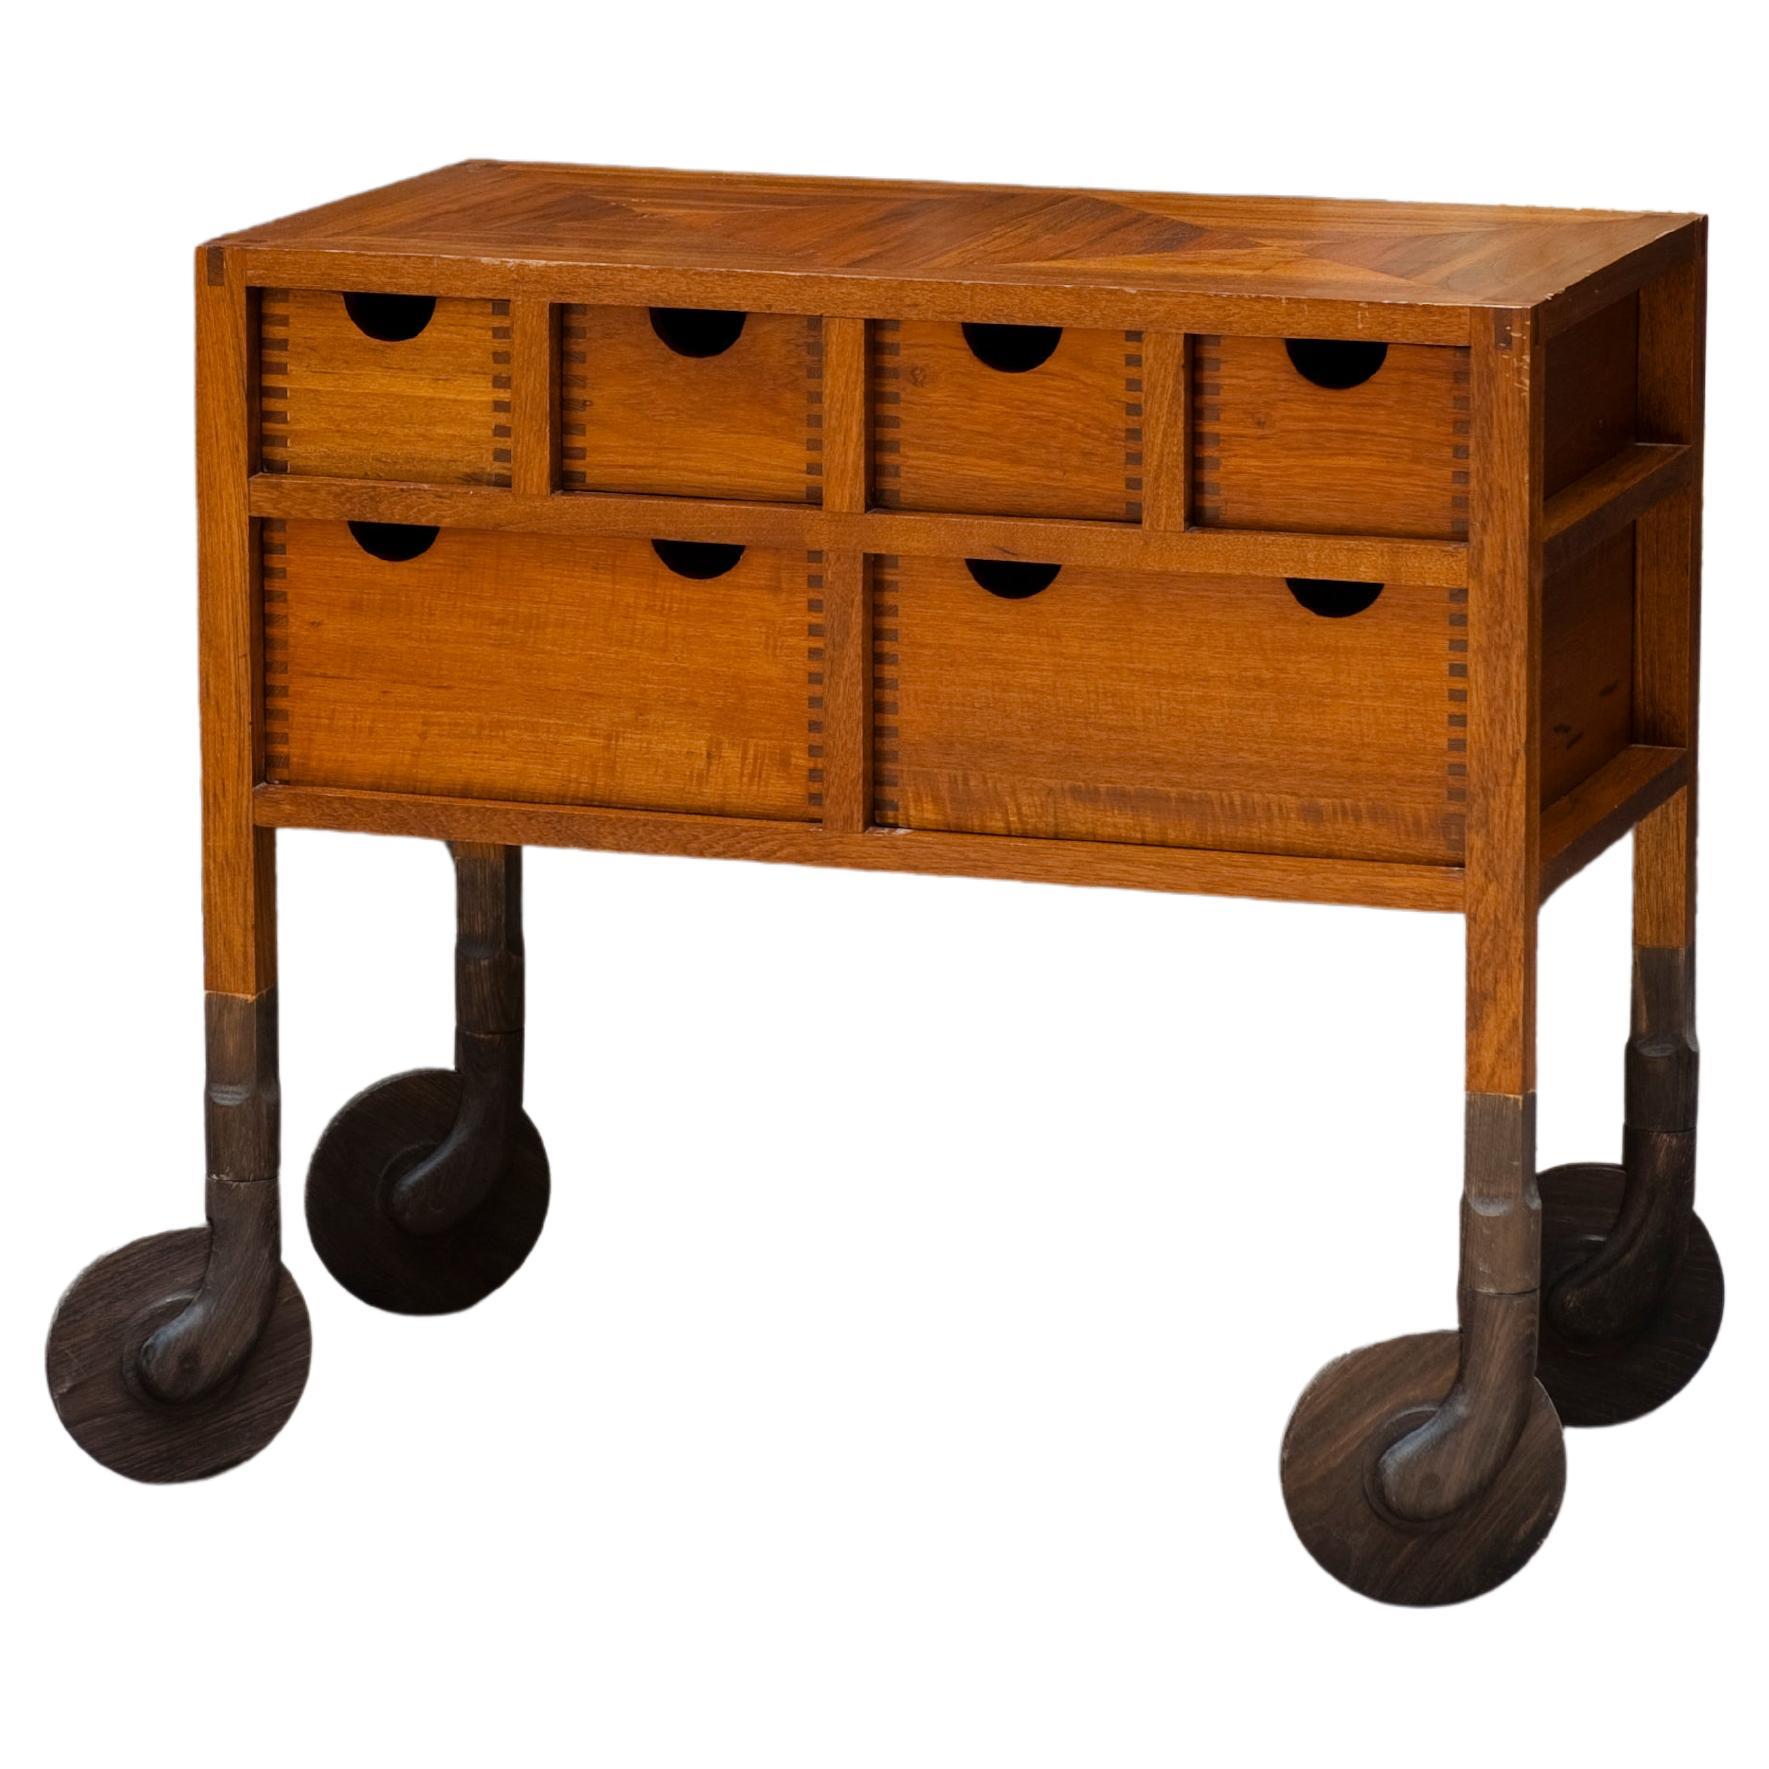 AKMD Rolling Dresser (low) all solid wood cabinet with wooden casters/wheels